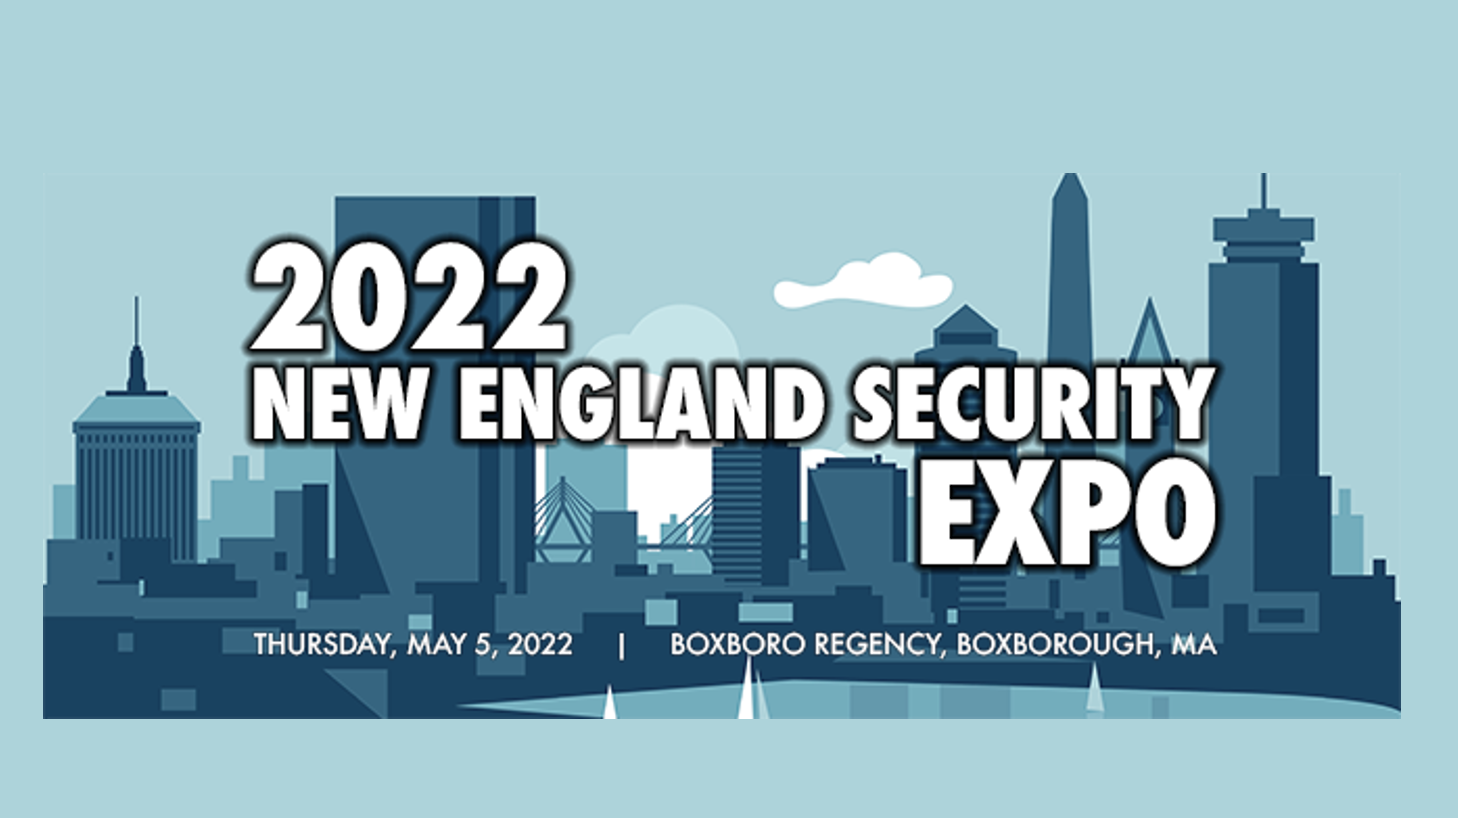 United Security to Exhibit at the ASIS New England Security EXPO